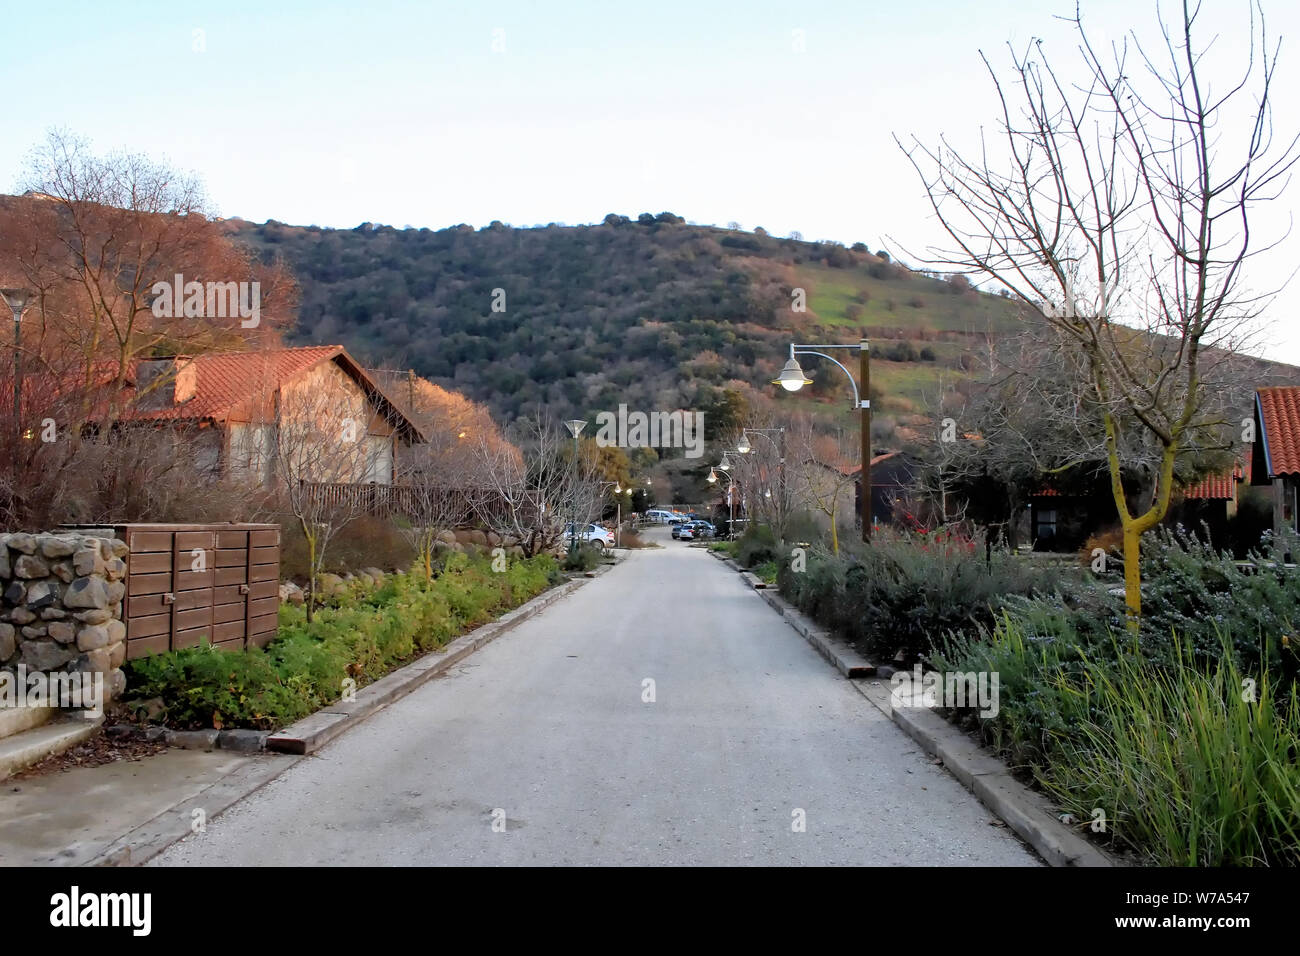 Looking down the main road of the Merom Golan resort in the Golan Heights of Israel. Stock Photo